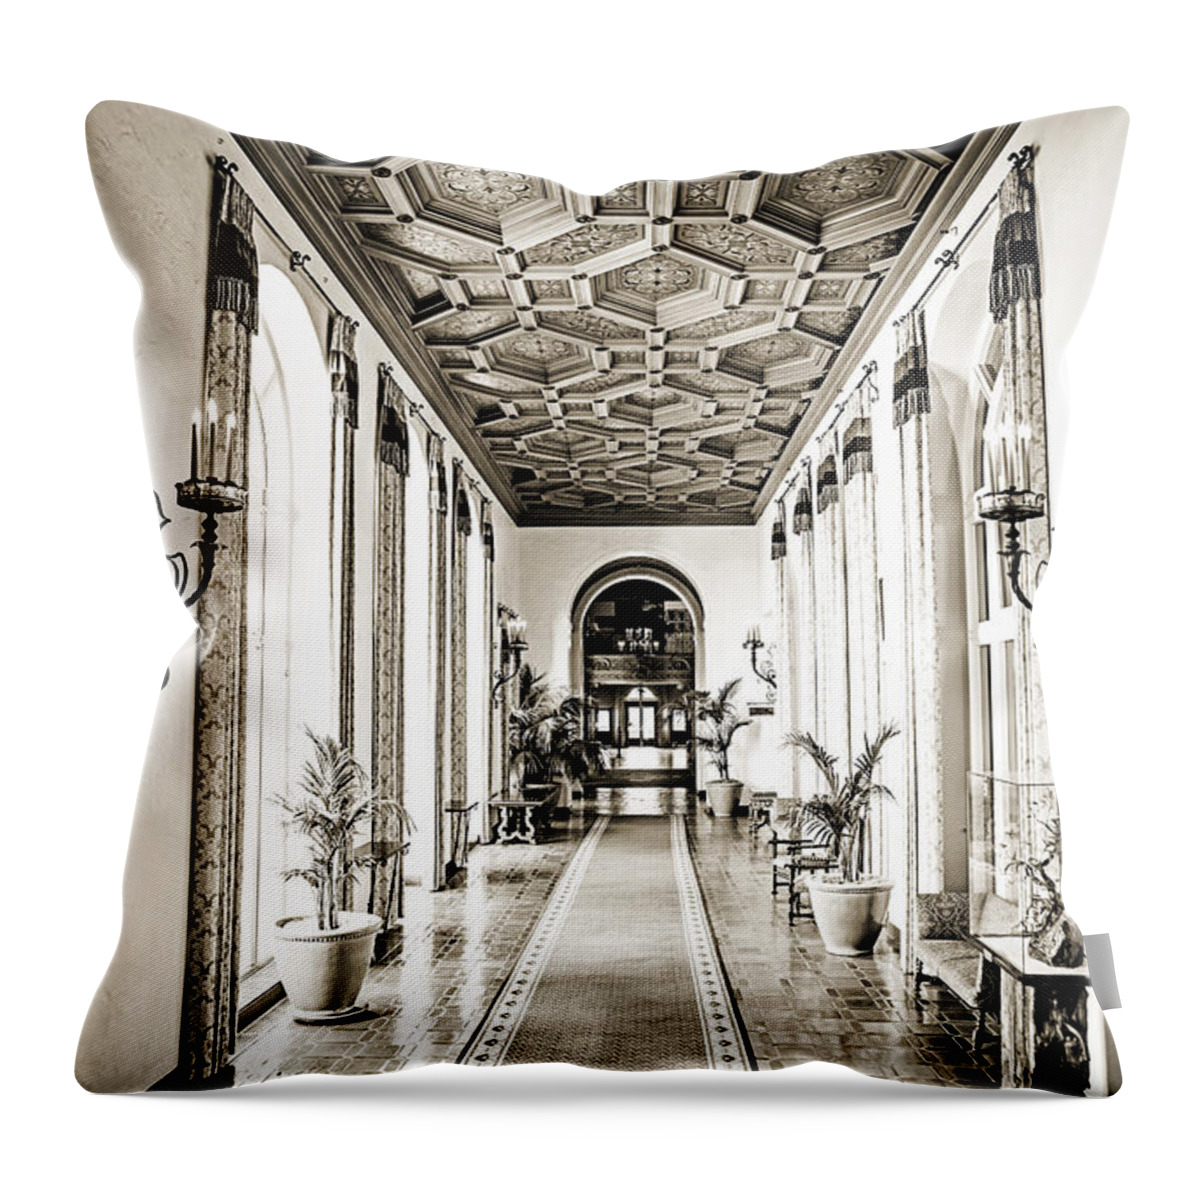 Hotel Throw Pillow featuring the photograph Hallway of Elegance #2 by Scott Pellegrin